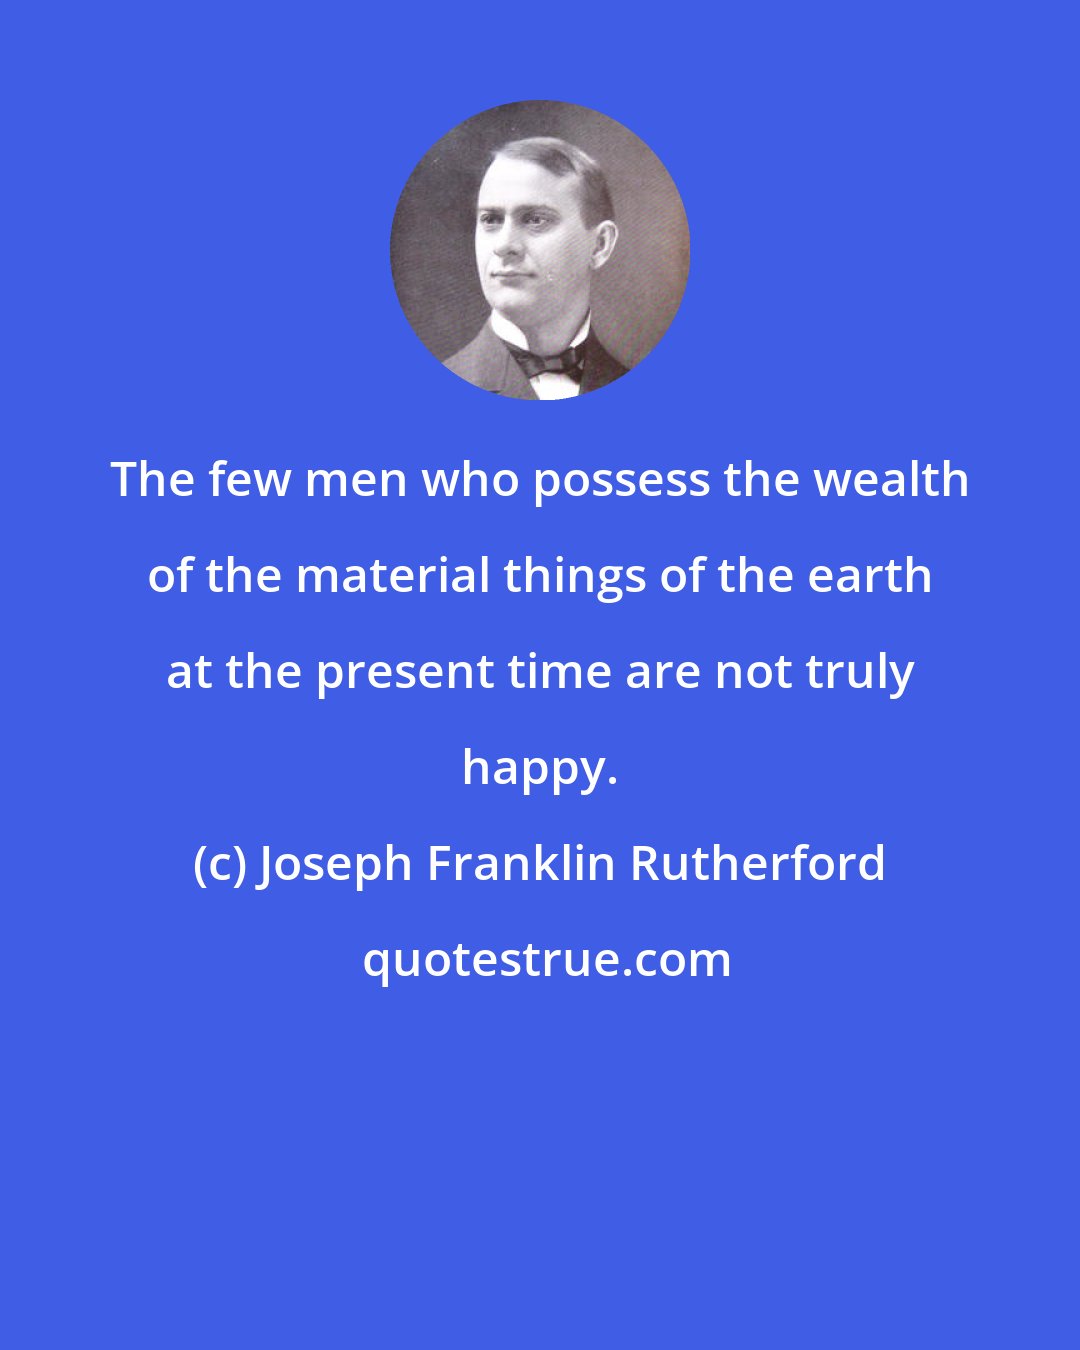 Joseph Franklin Rutherford: The few men who possess the wealth of the material things of the earth at the present time are not truly happy.